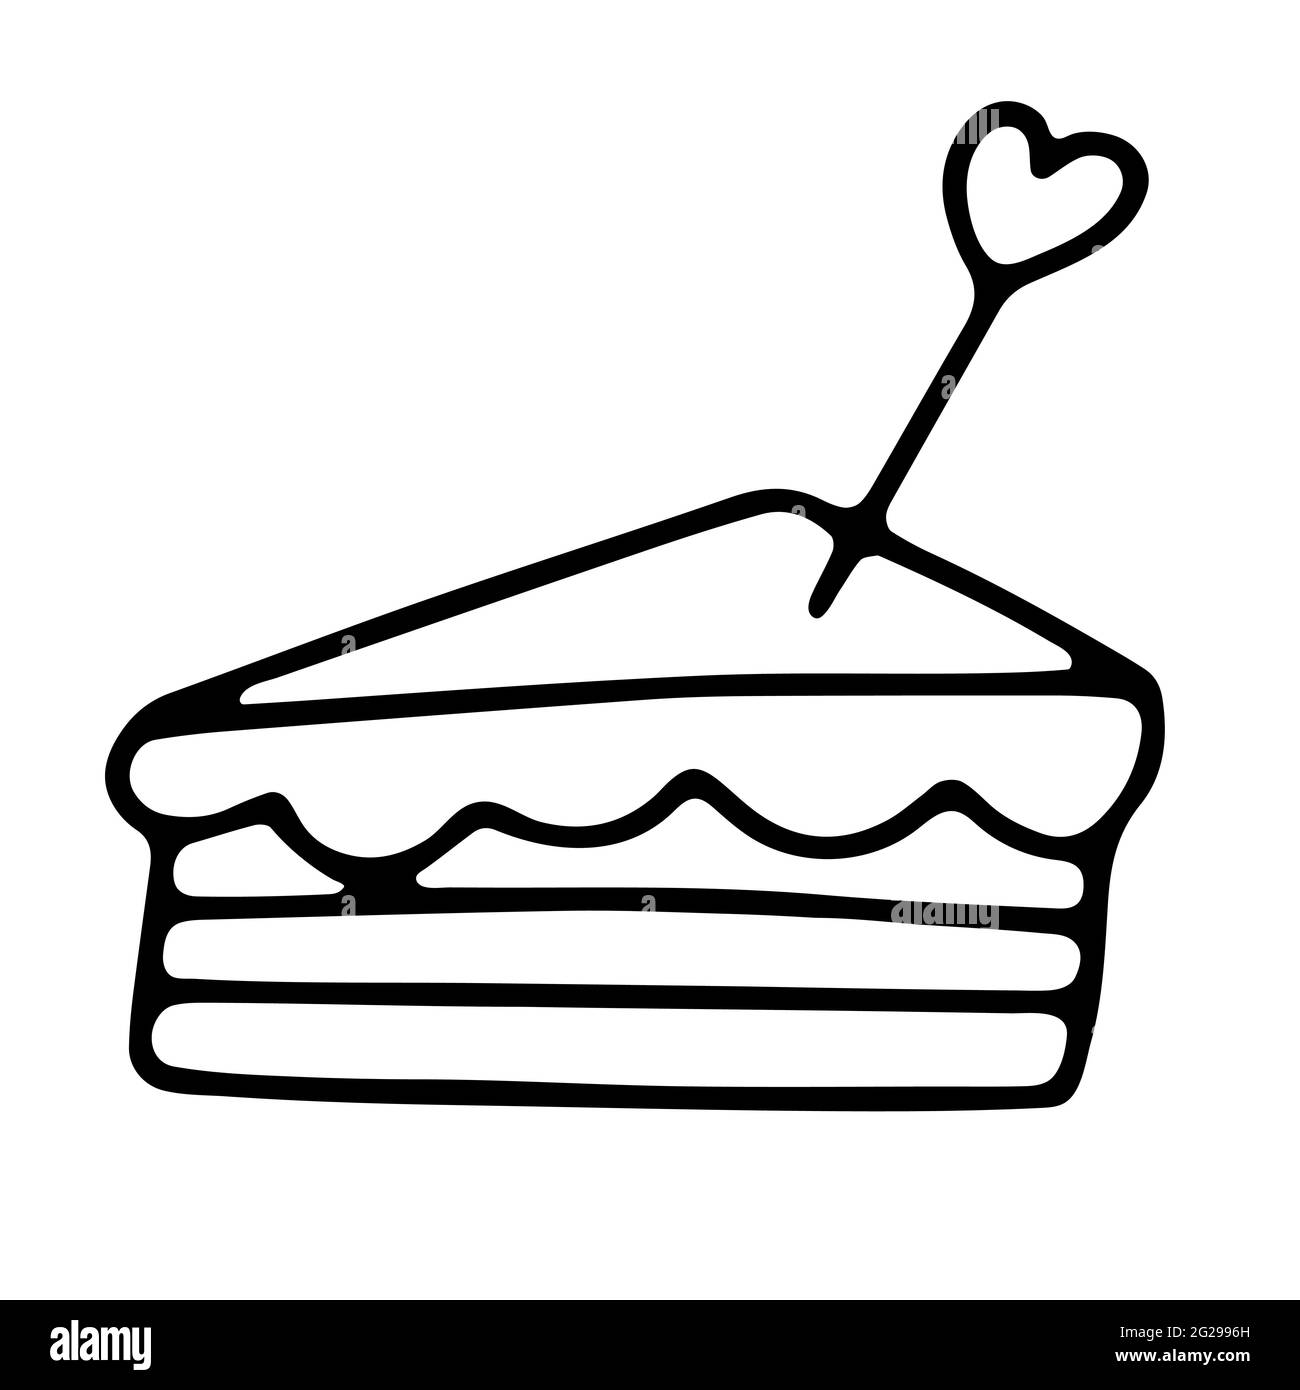 Doodle cake with cream, candy heart. Hand-drawn outline cute dessert isolated on white background. Sweet bake sign of gender party, Happy Birthday, ce Stock Vector